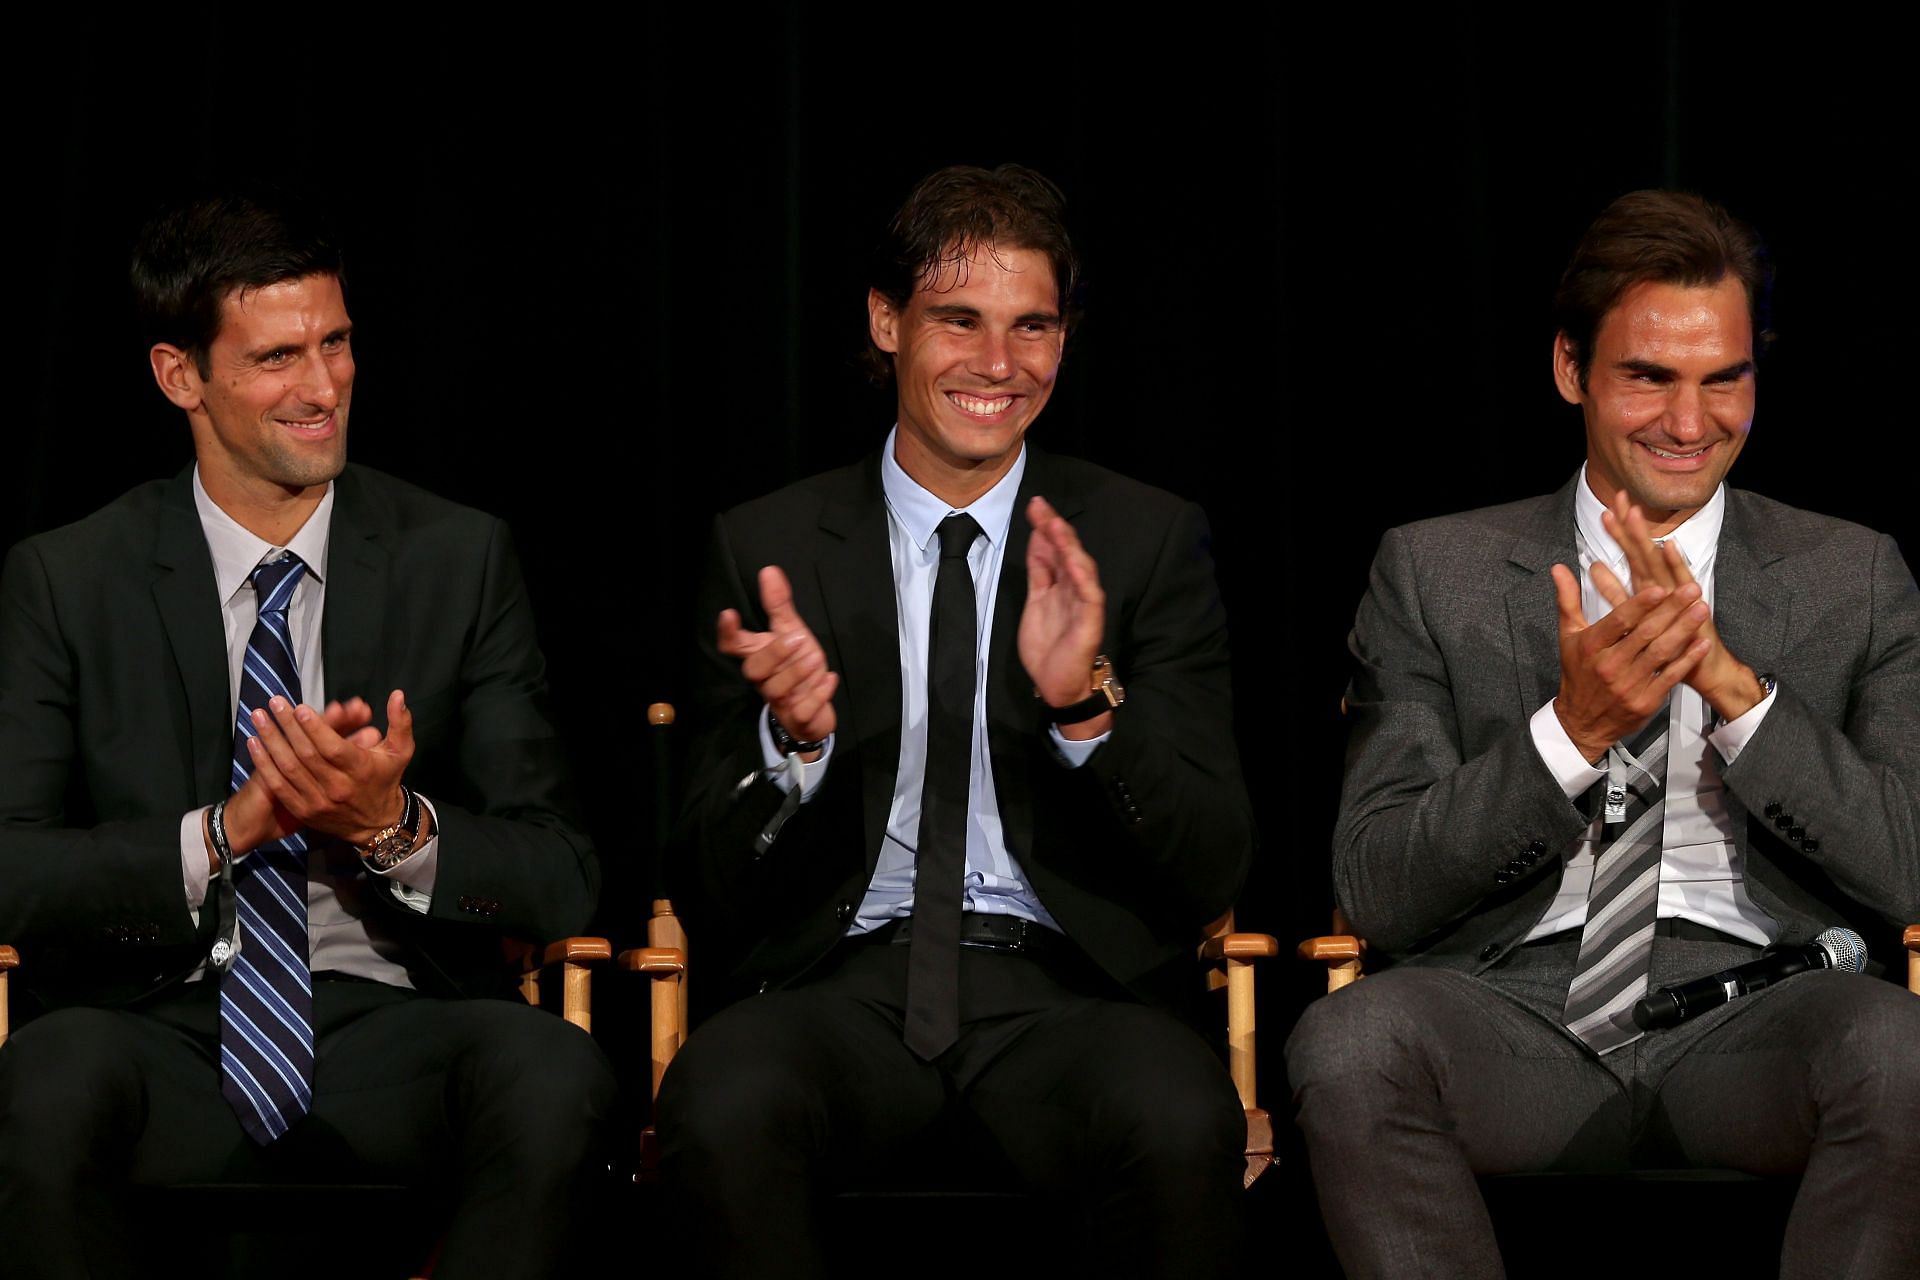 Federer, Nadal and Djokovic (from right to left)